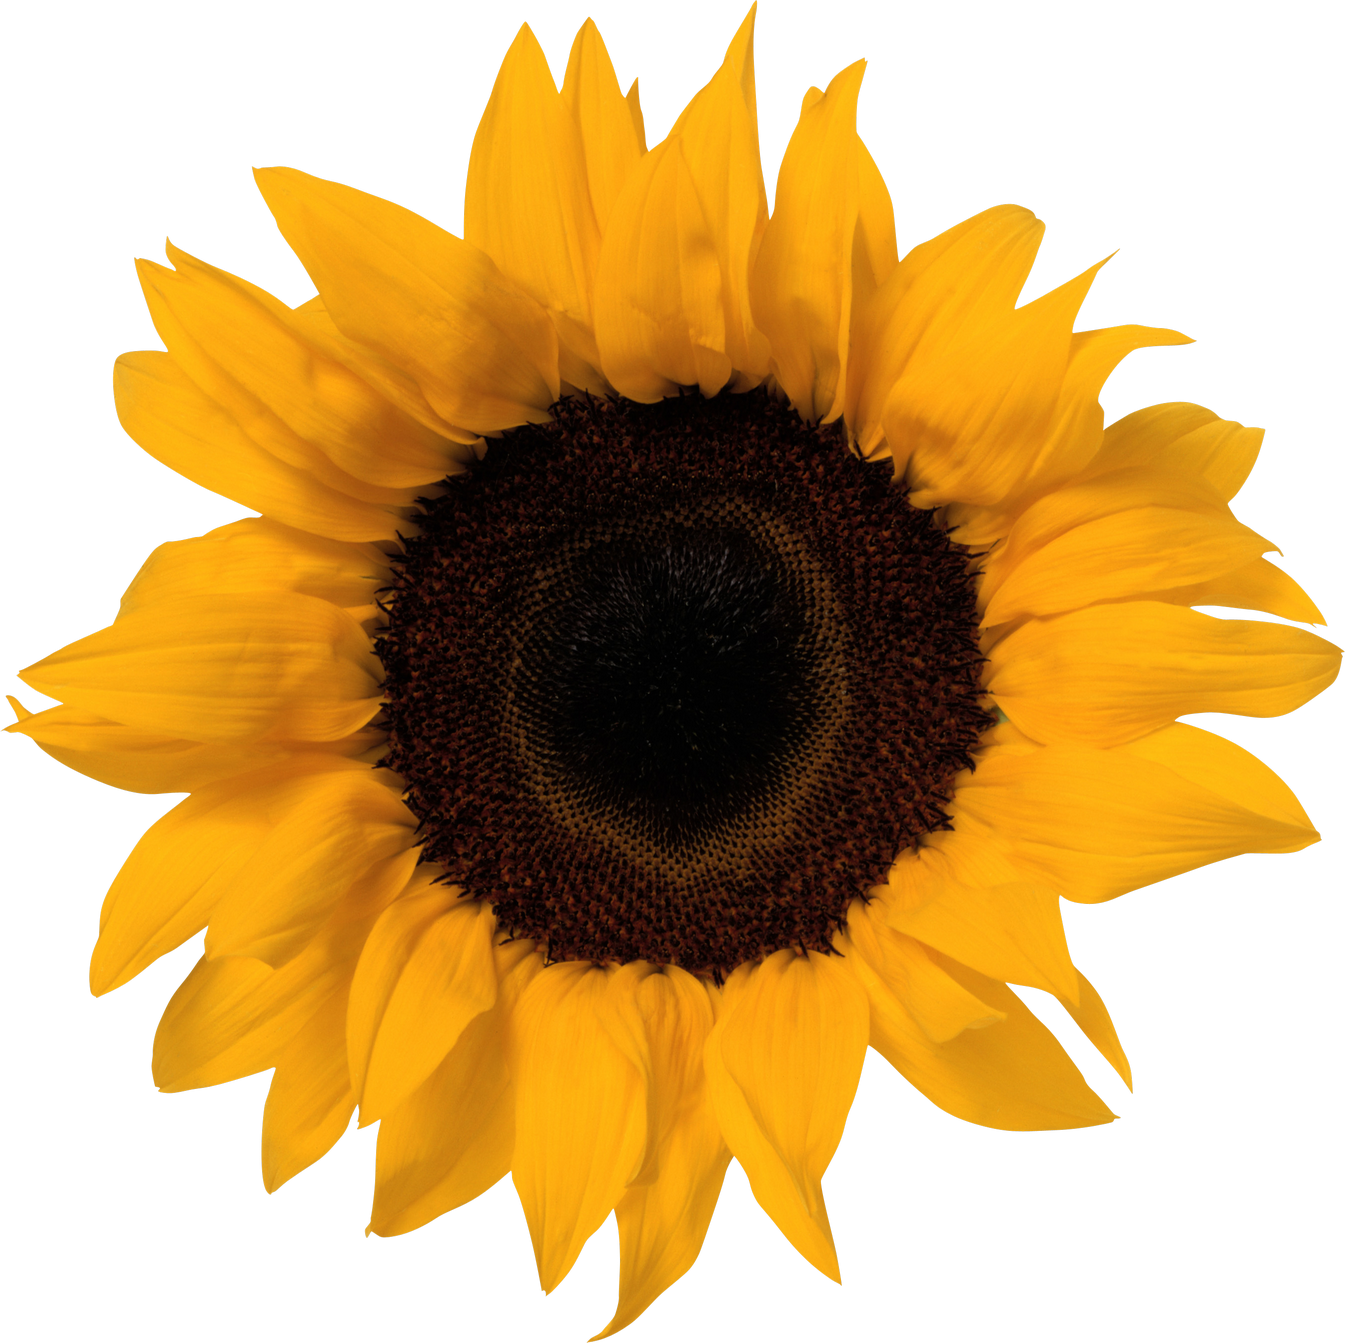 Download Sunflower PNG Image - PurePNG | Free transparent CC0 PNG ...